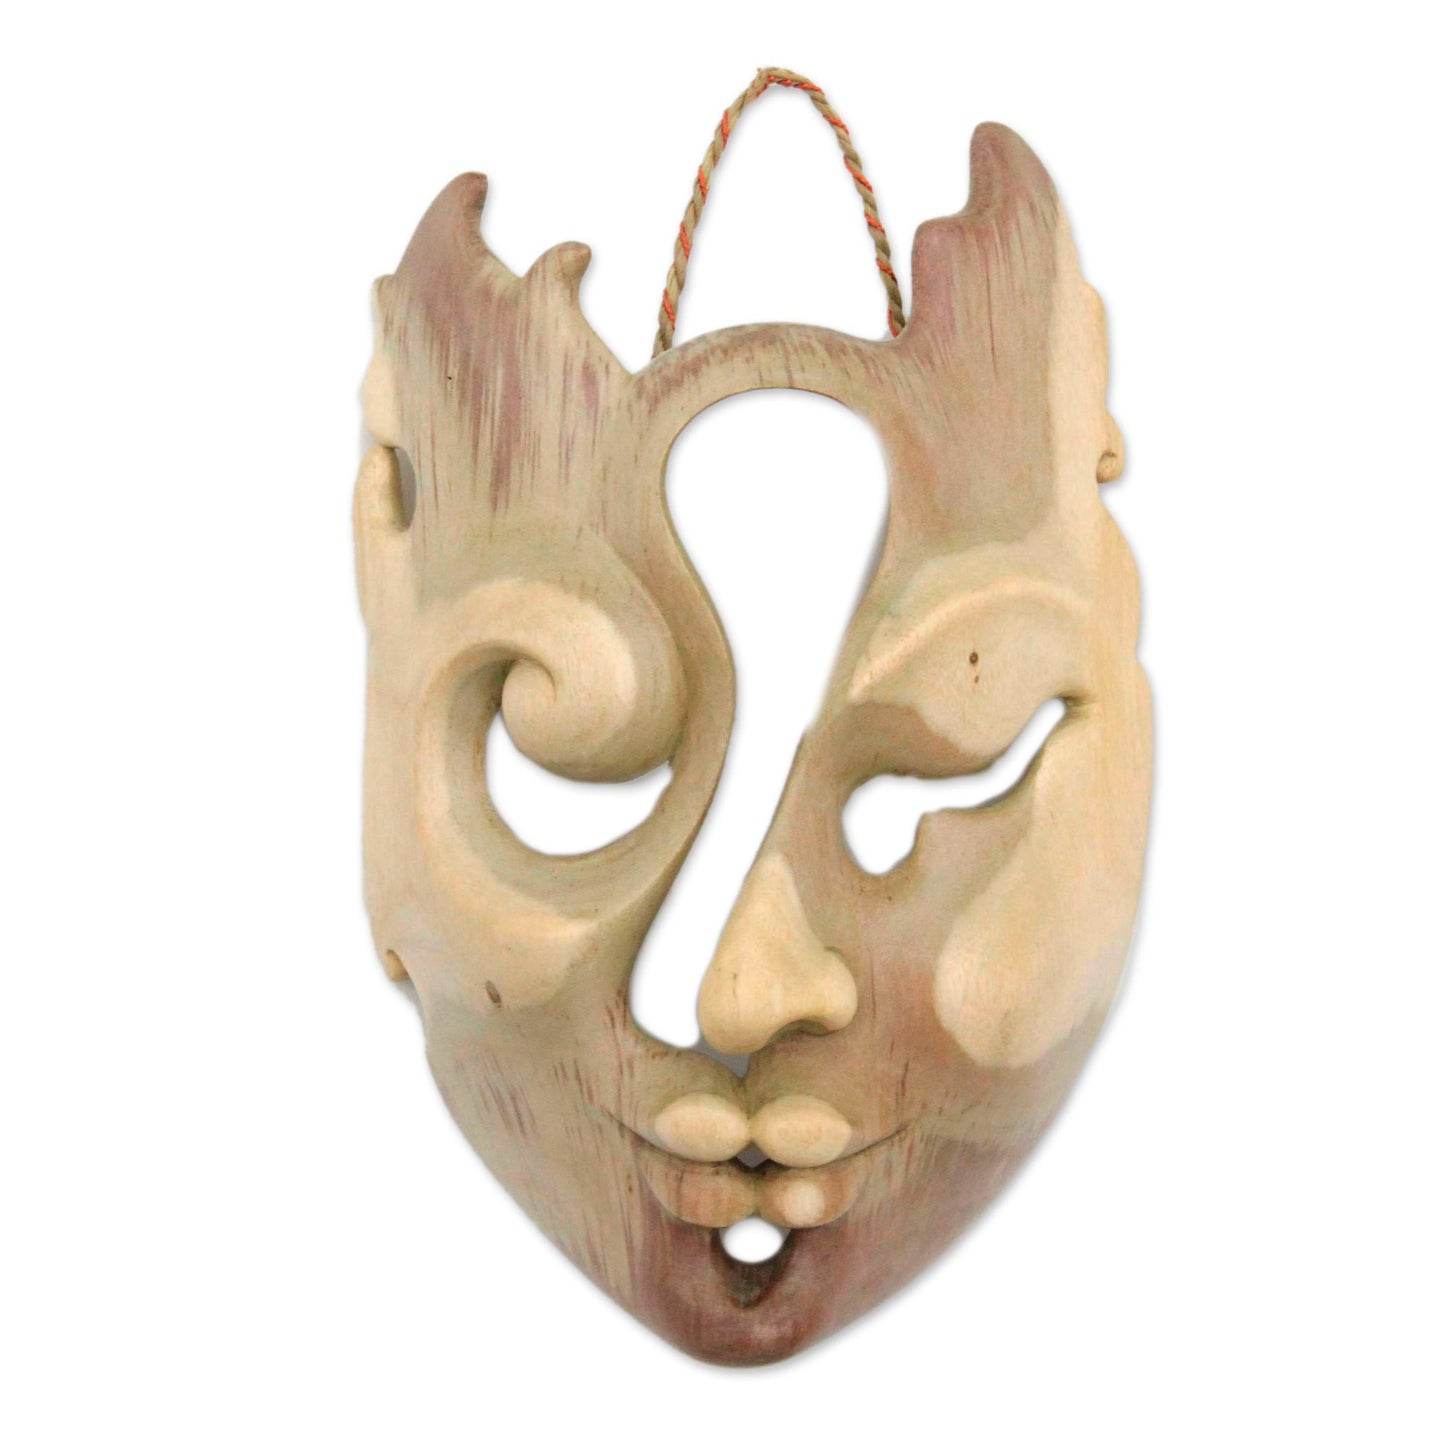 The Collaboration Decorative Hibiscus Wood Mask